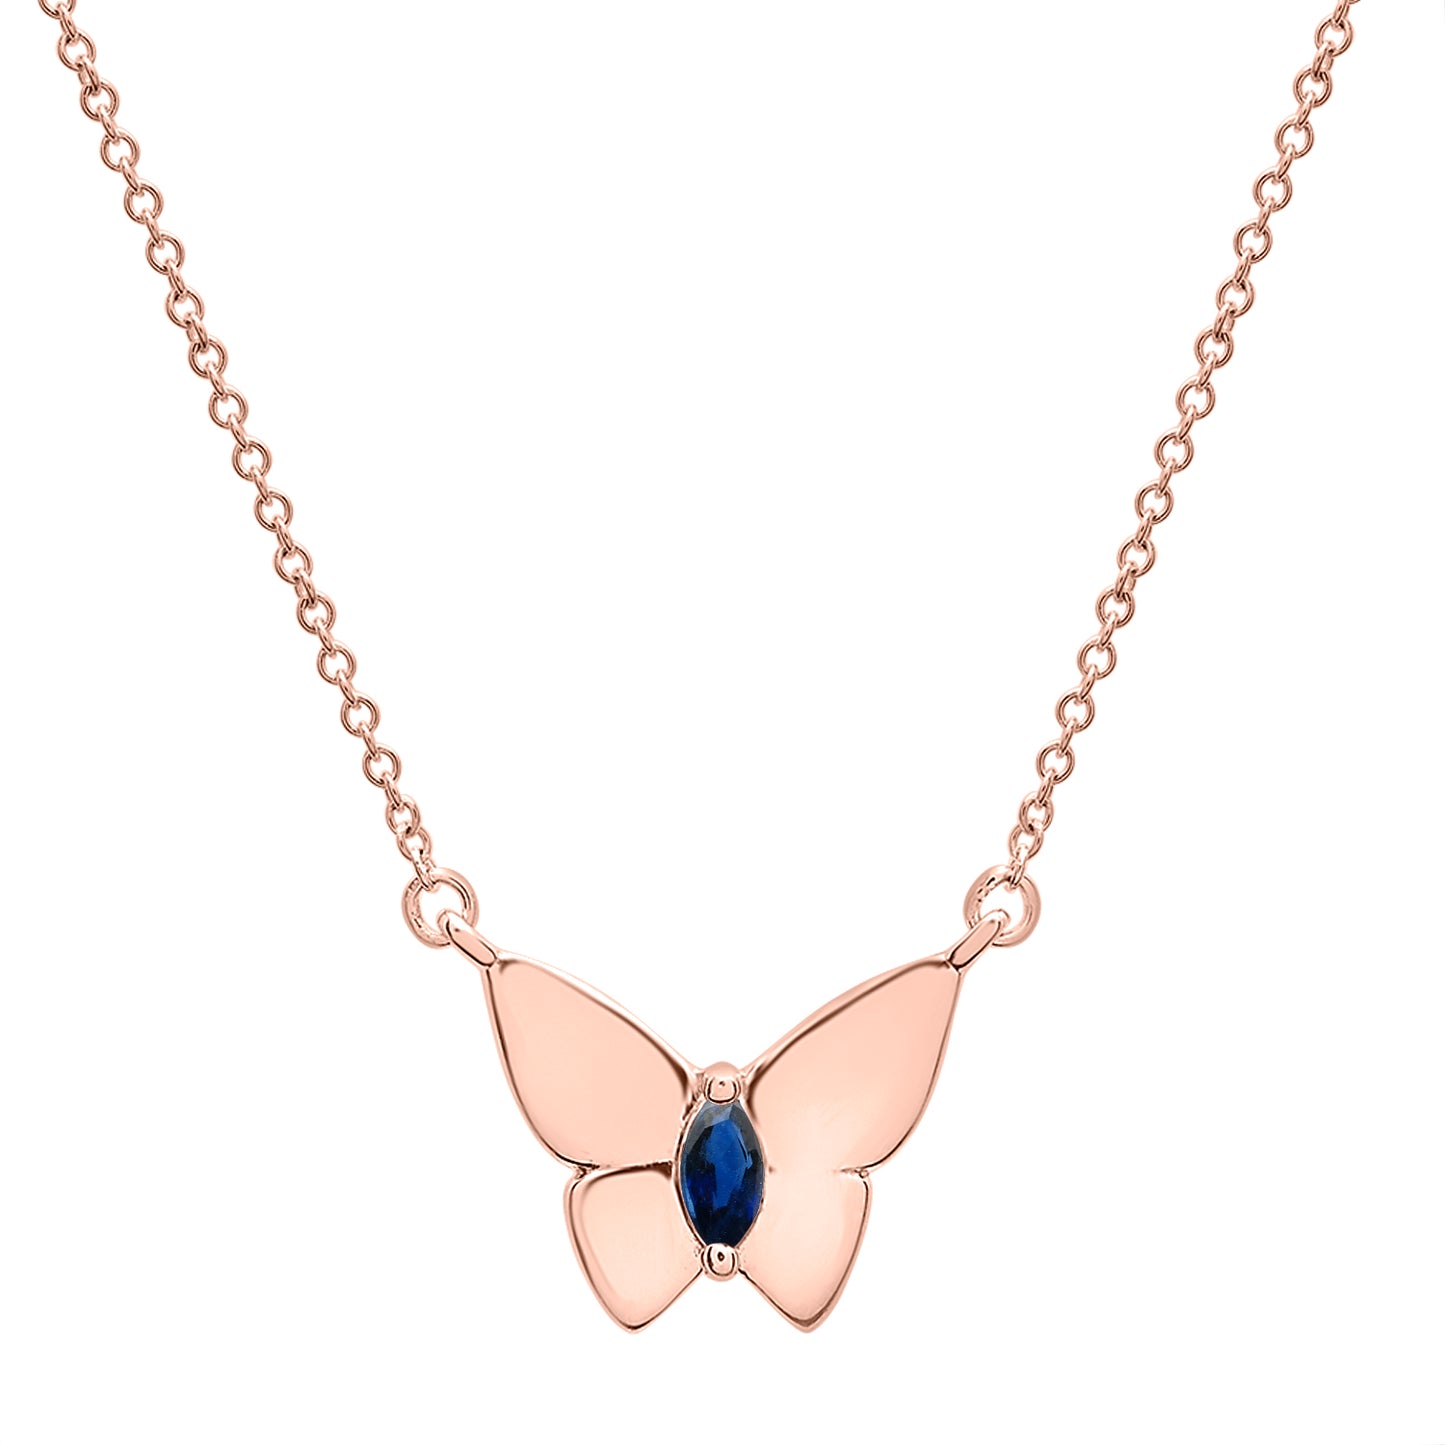 Butterfly Birthstone Necklace in Blue with Gold chain